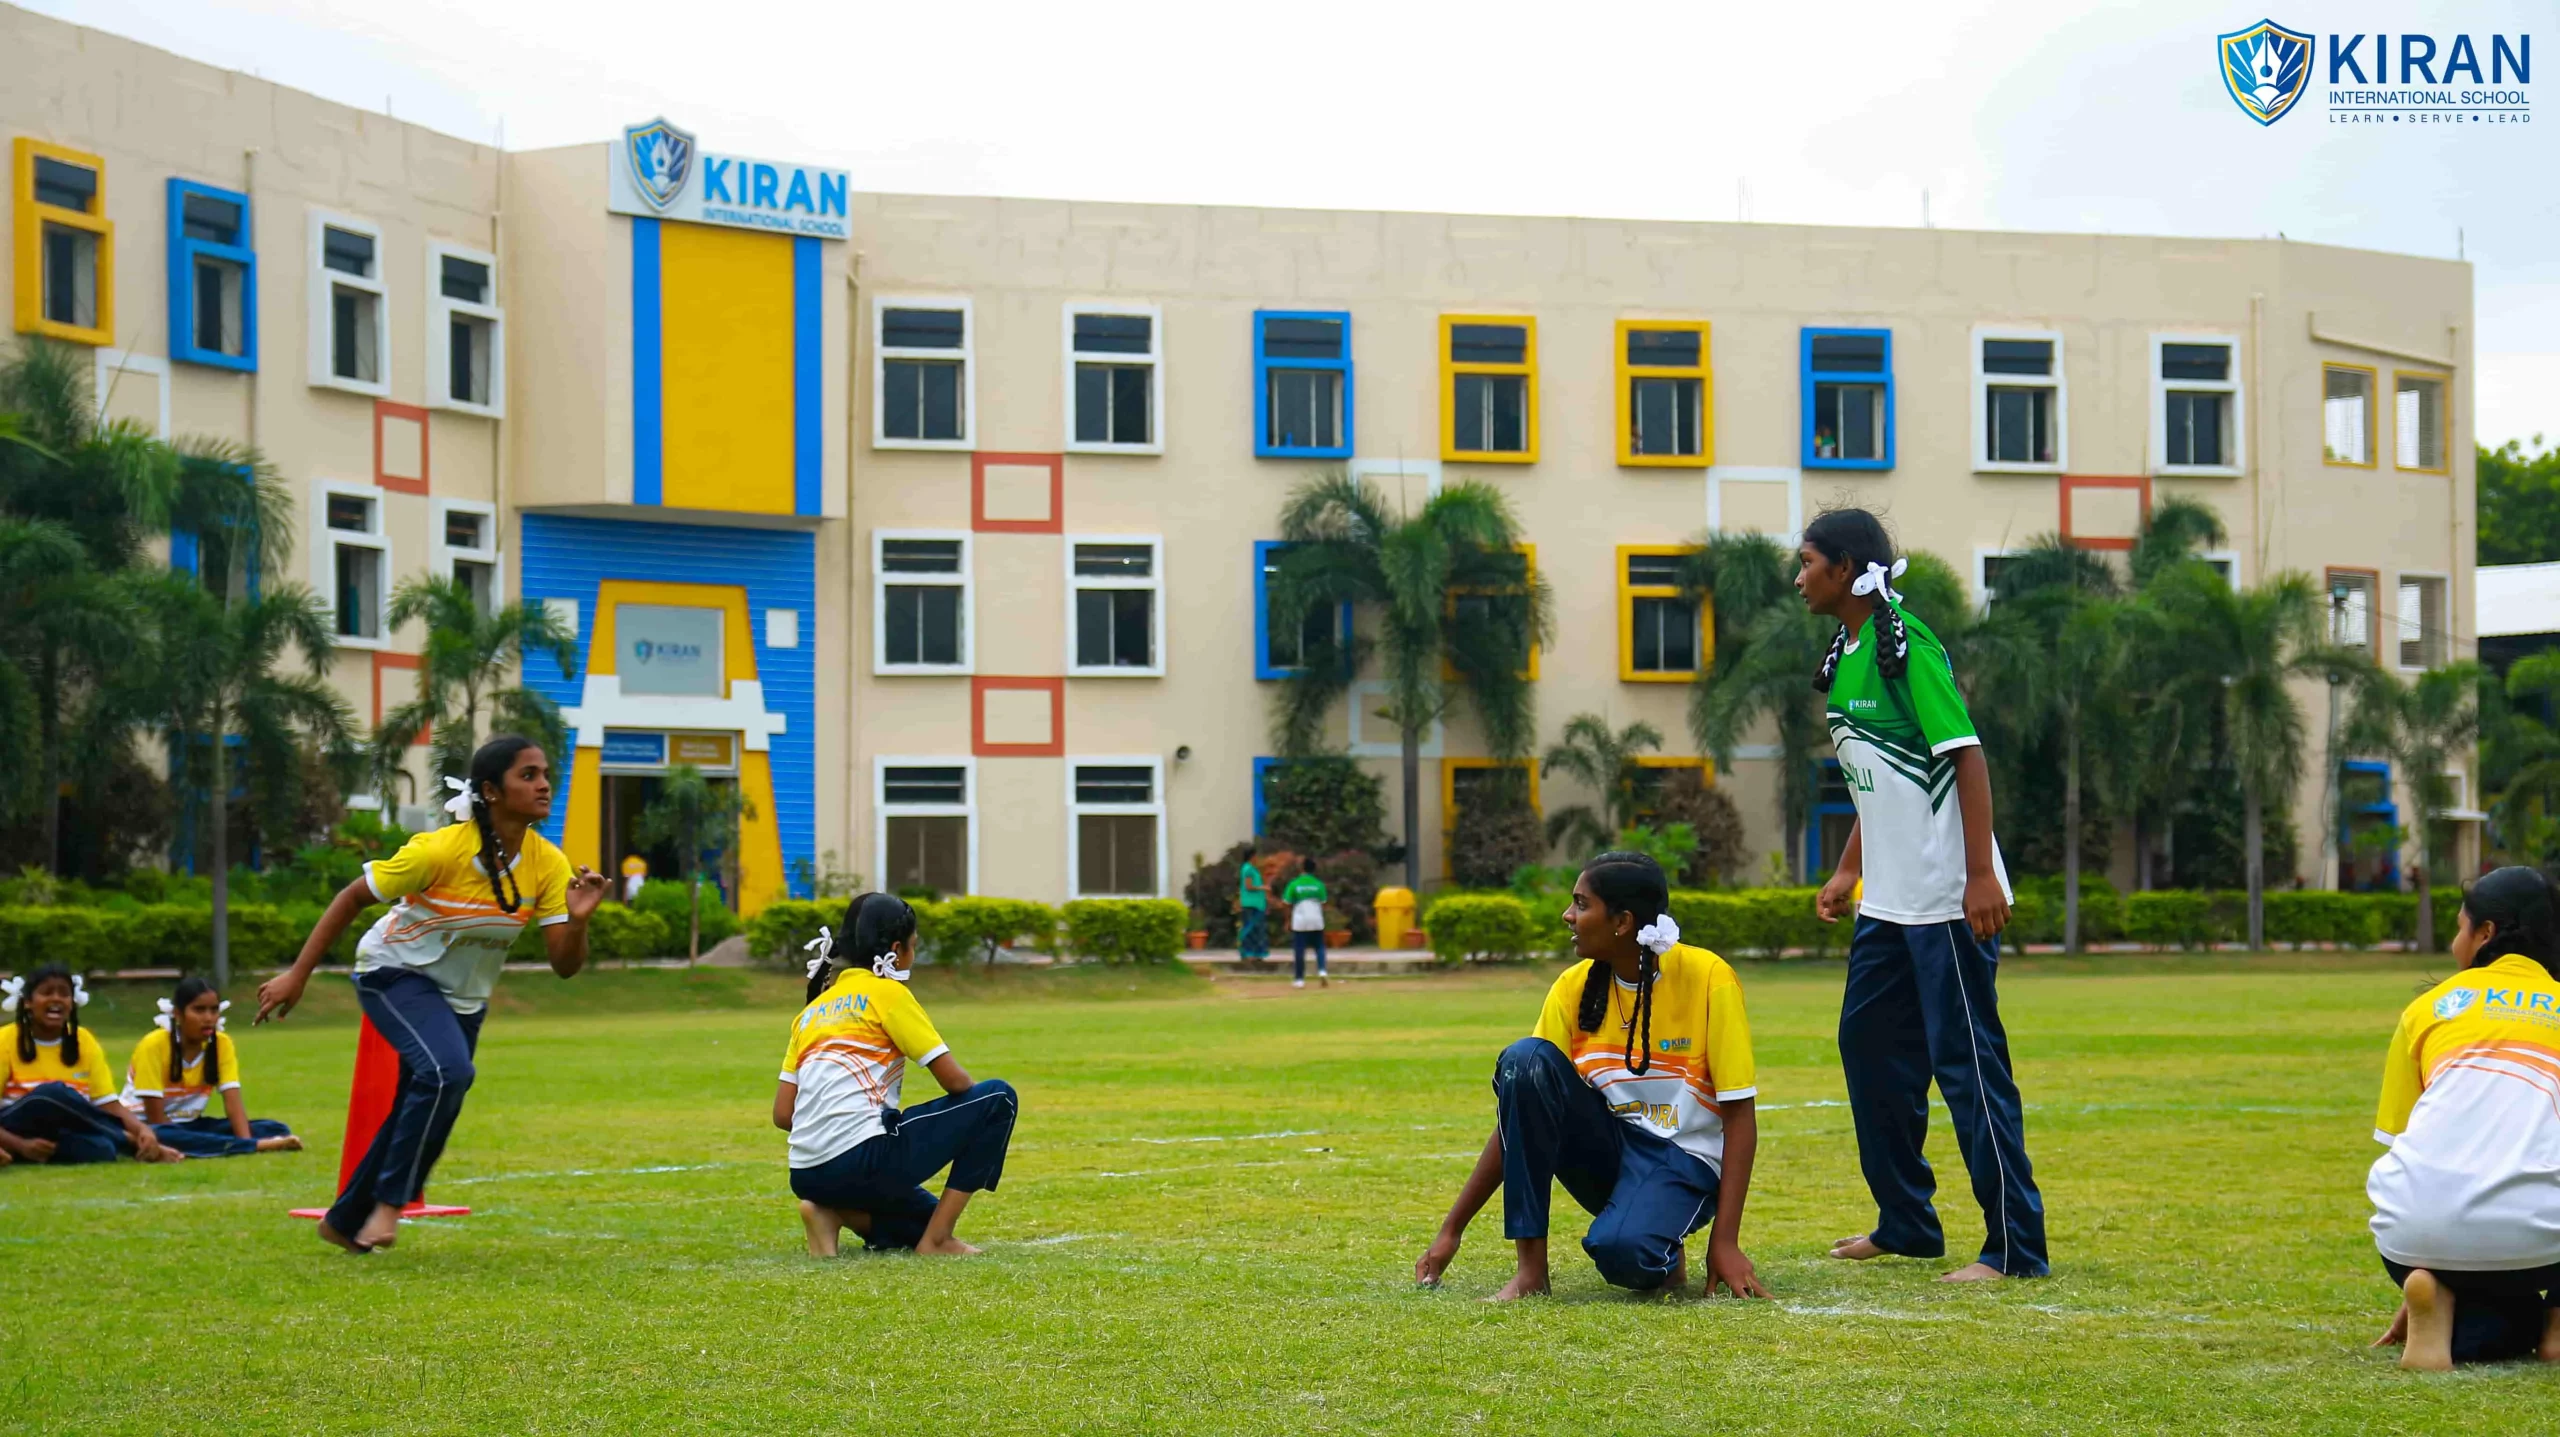 students are playing in school grounds